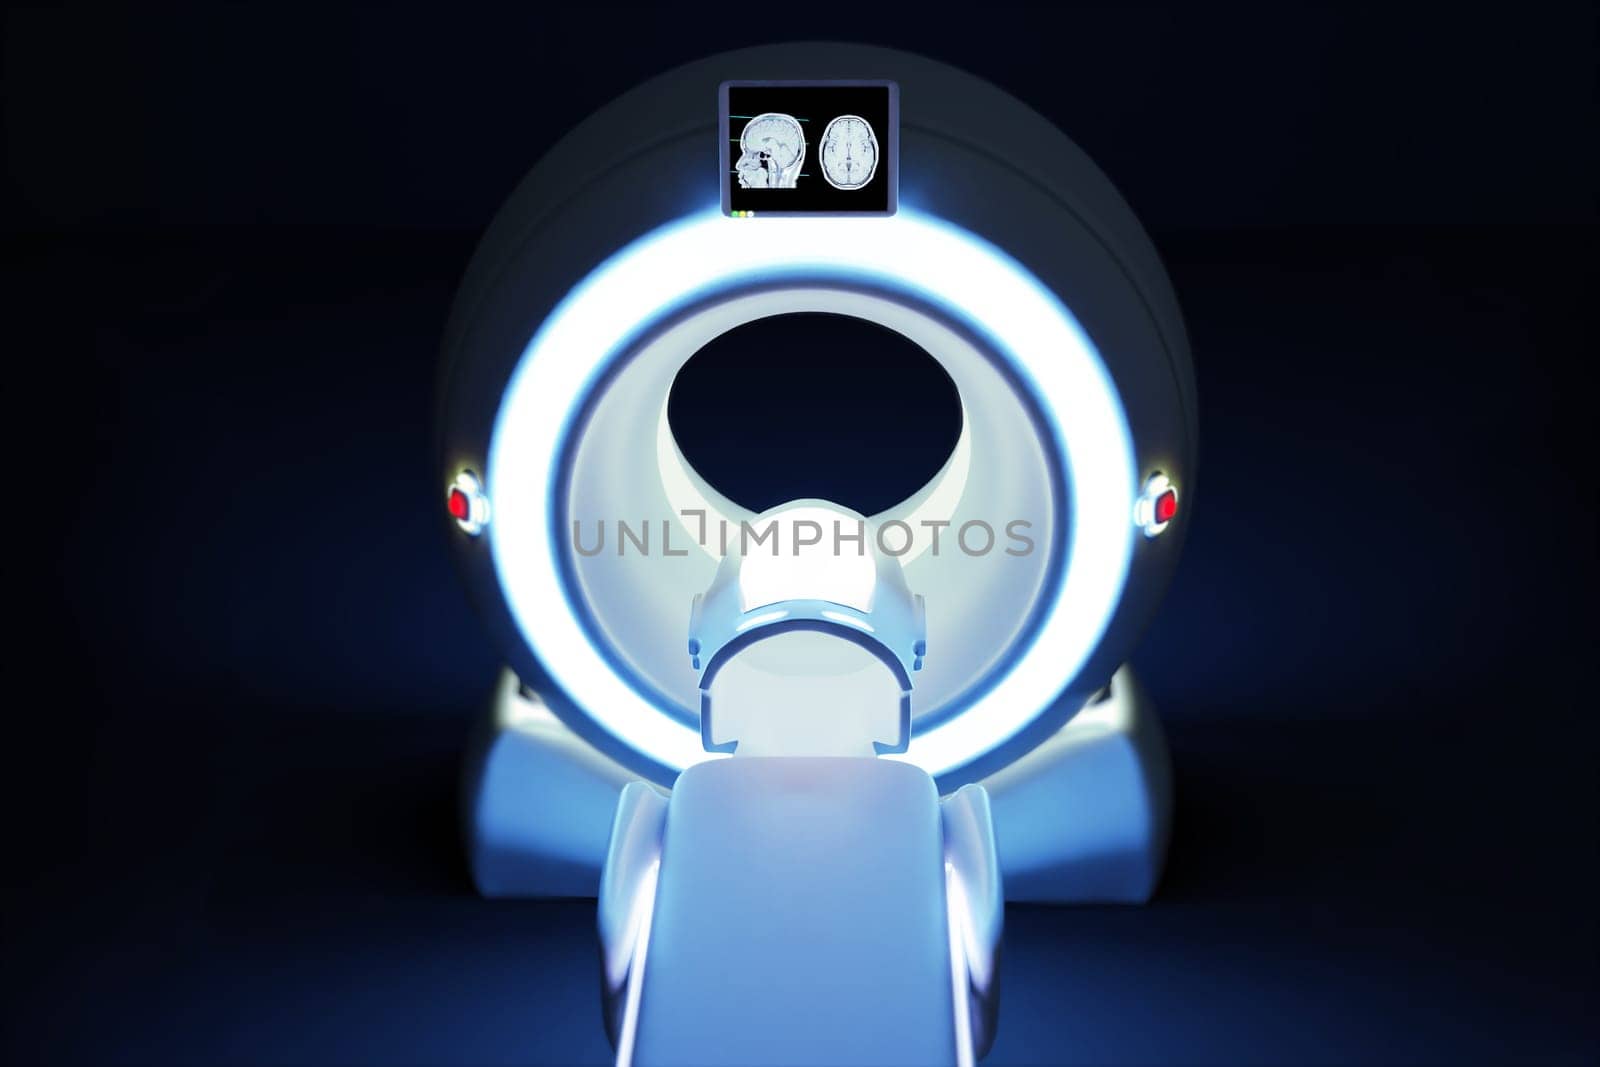 Fronr view of MRI SCANNER - Magnetic resonance imaging  device in Hospital 3D rendering  . Medical Equipment and Health Care background.